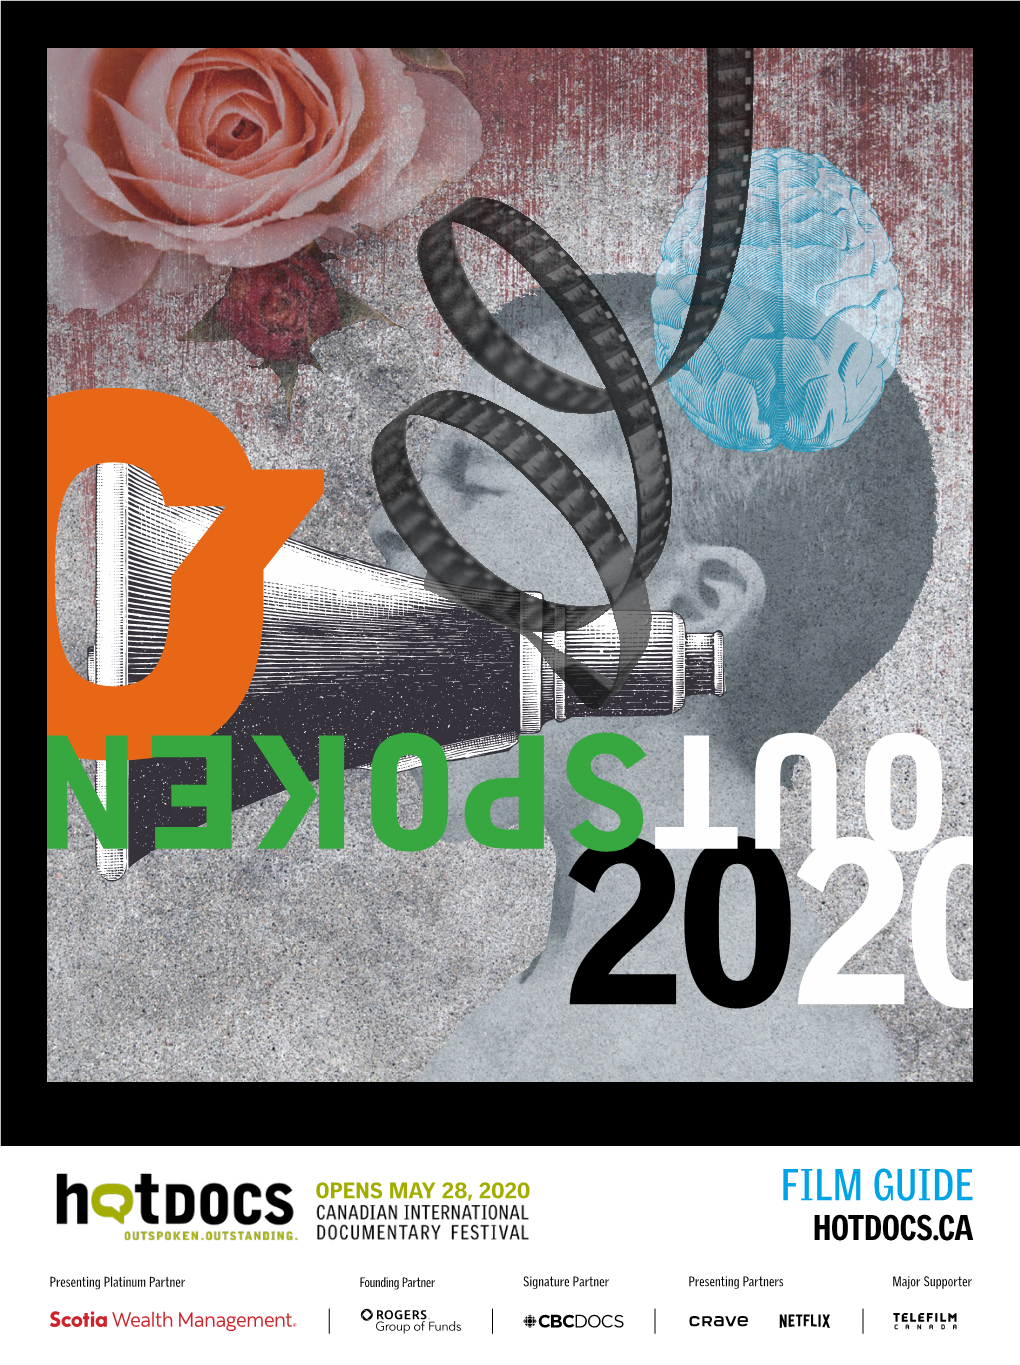 Film Guide HOTDOCS.CA Bring Creative and Business Together